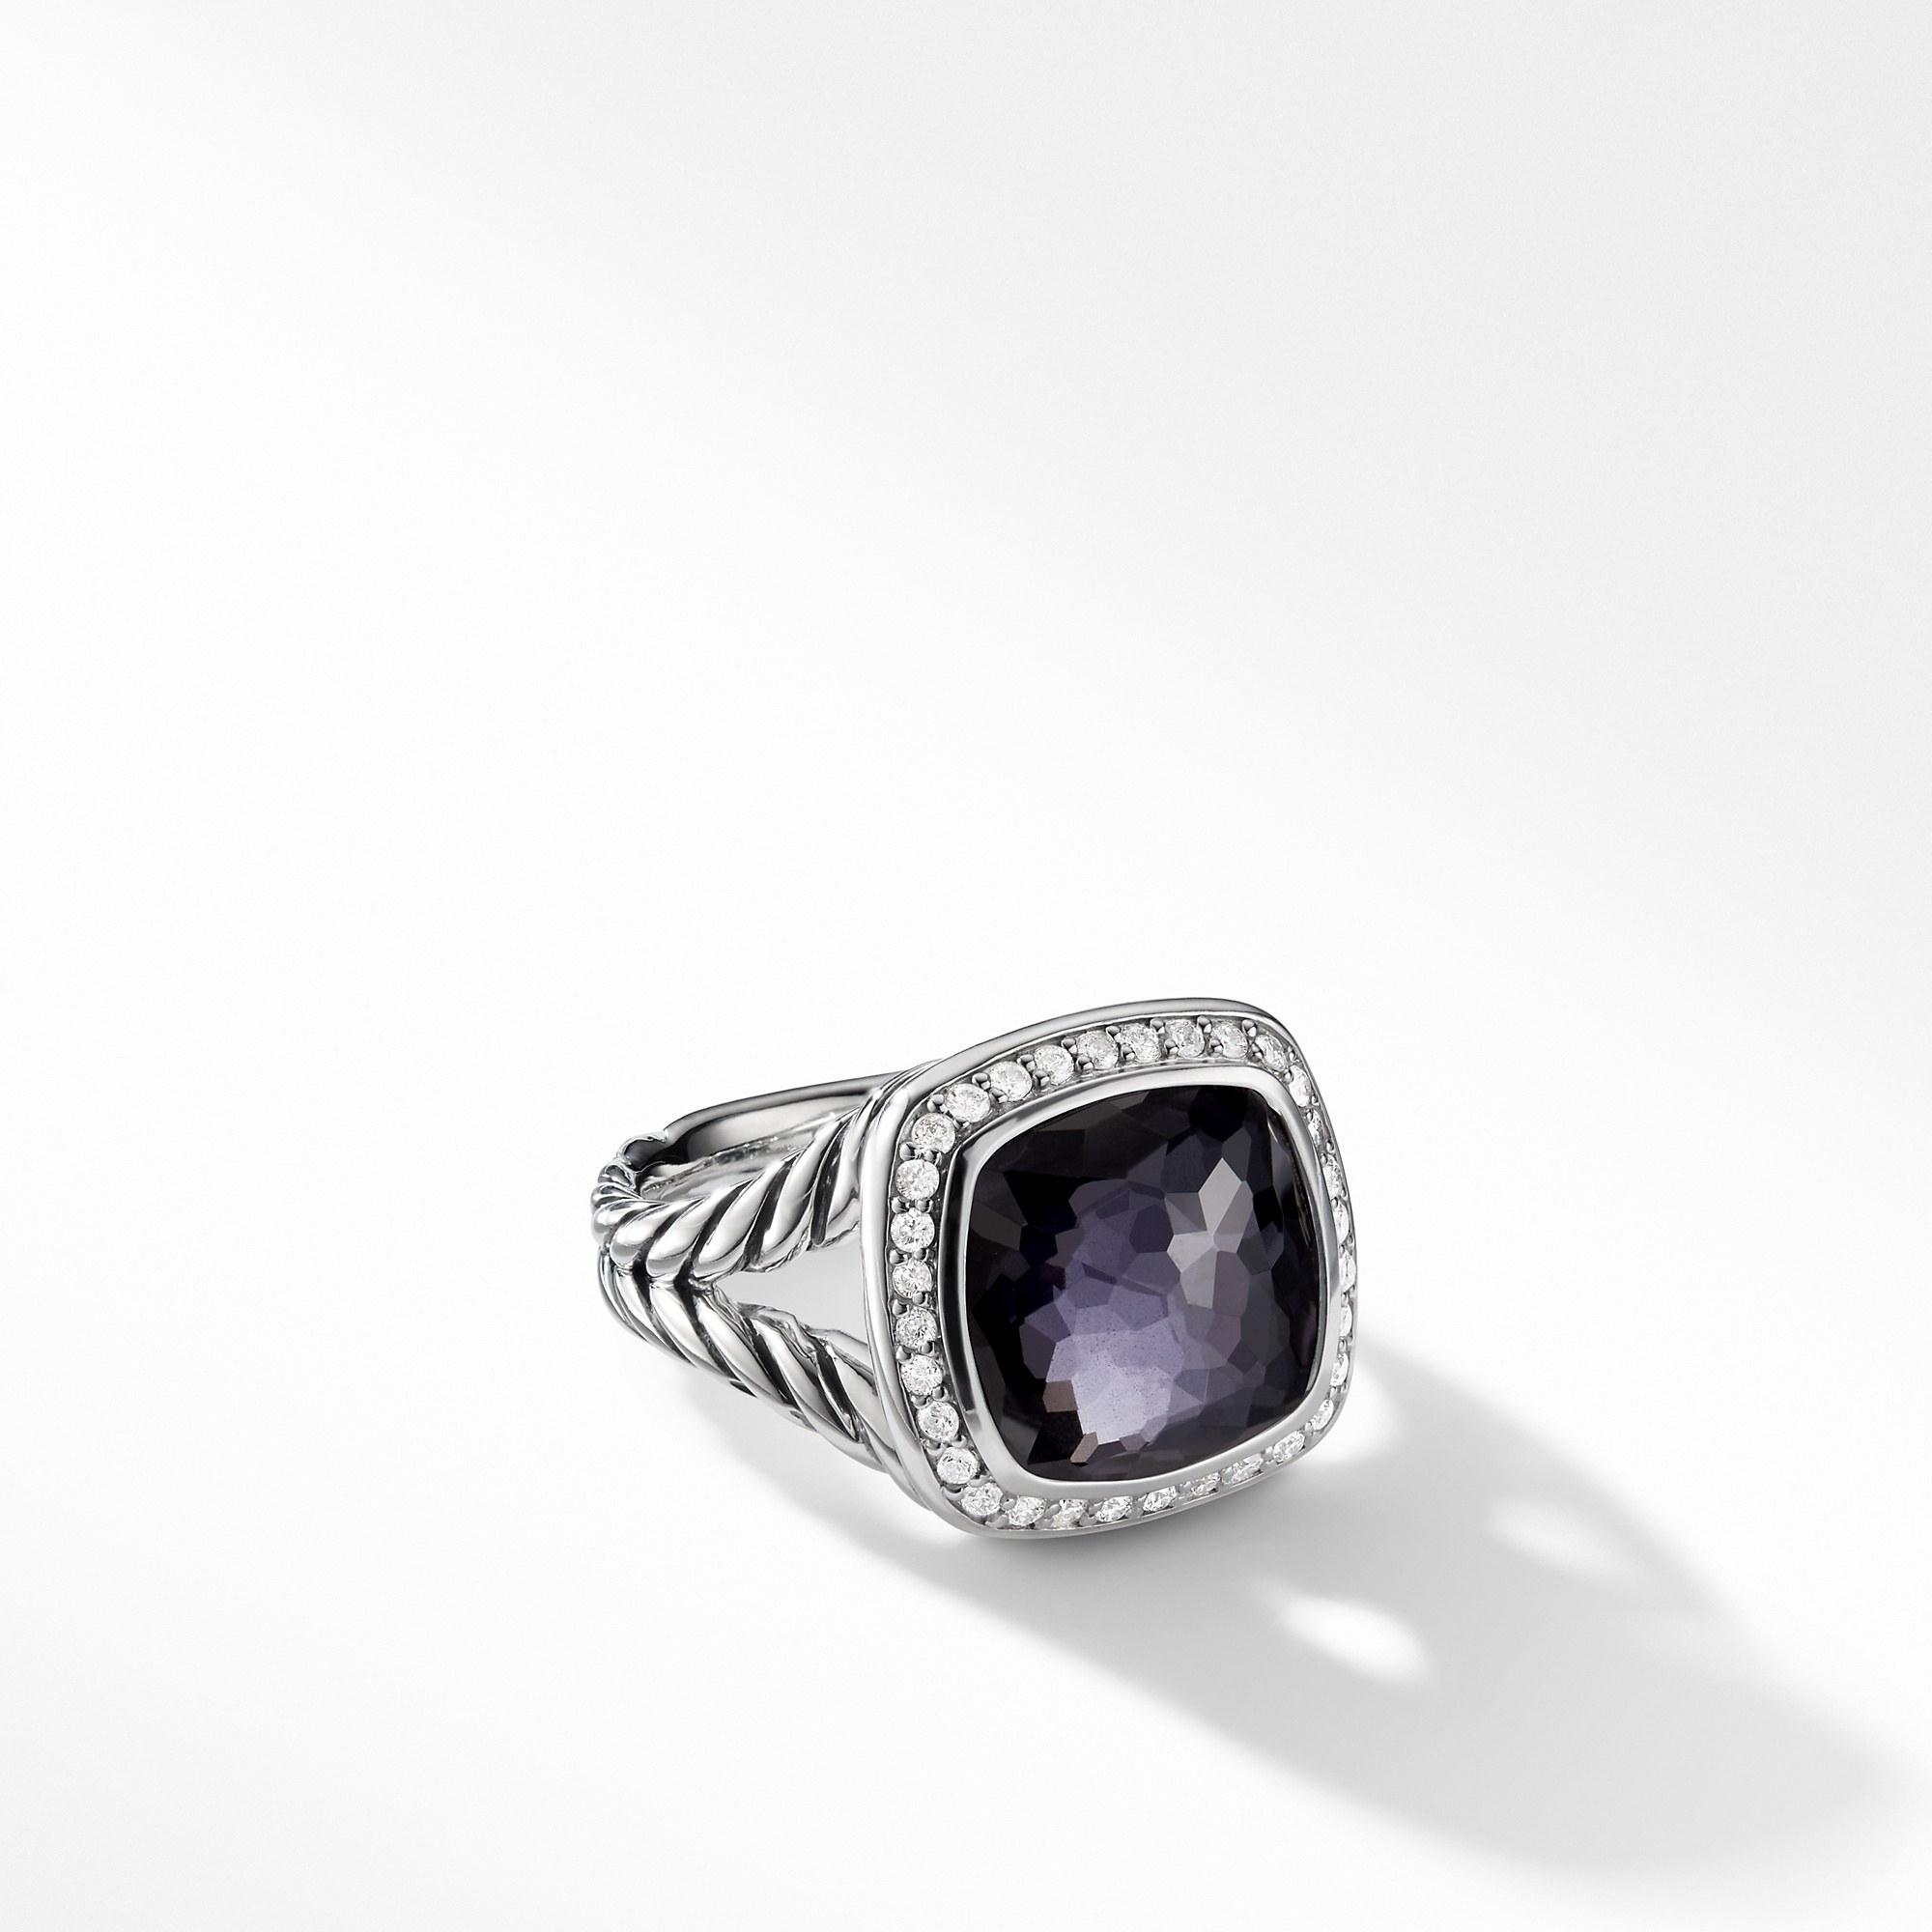 David Yurman Albion Ring with Lavender Amethyst and Diamonds, size 6